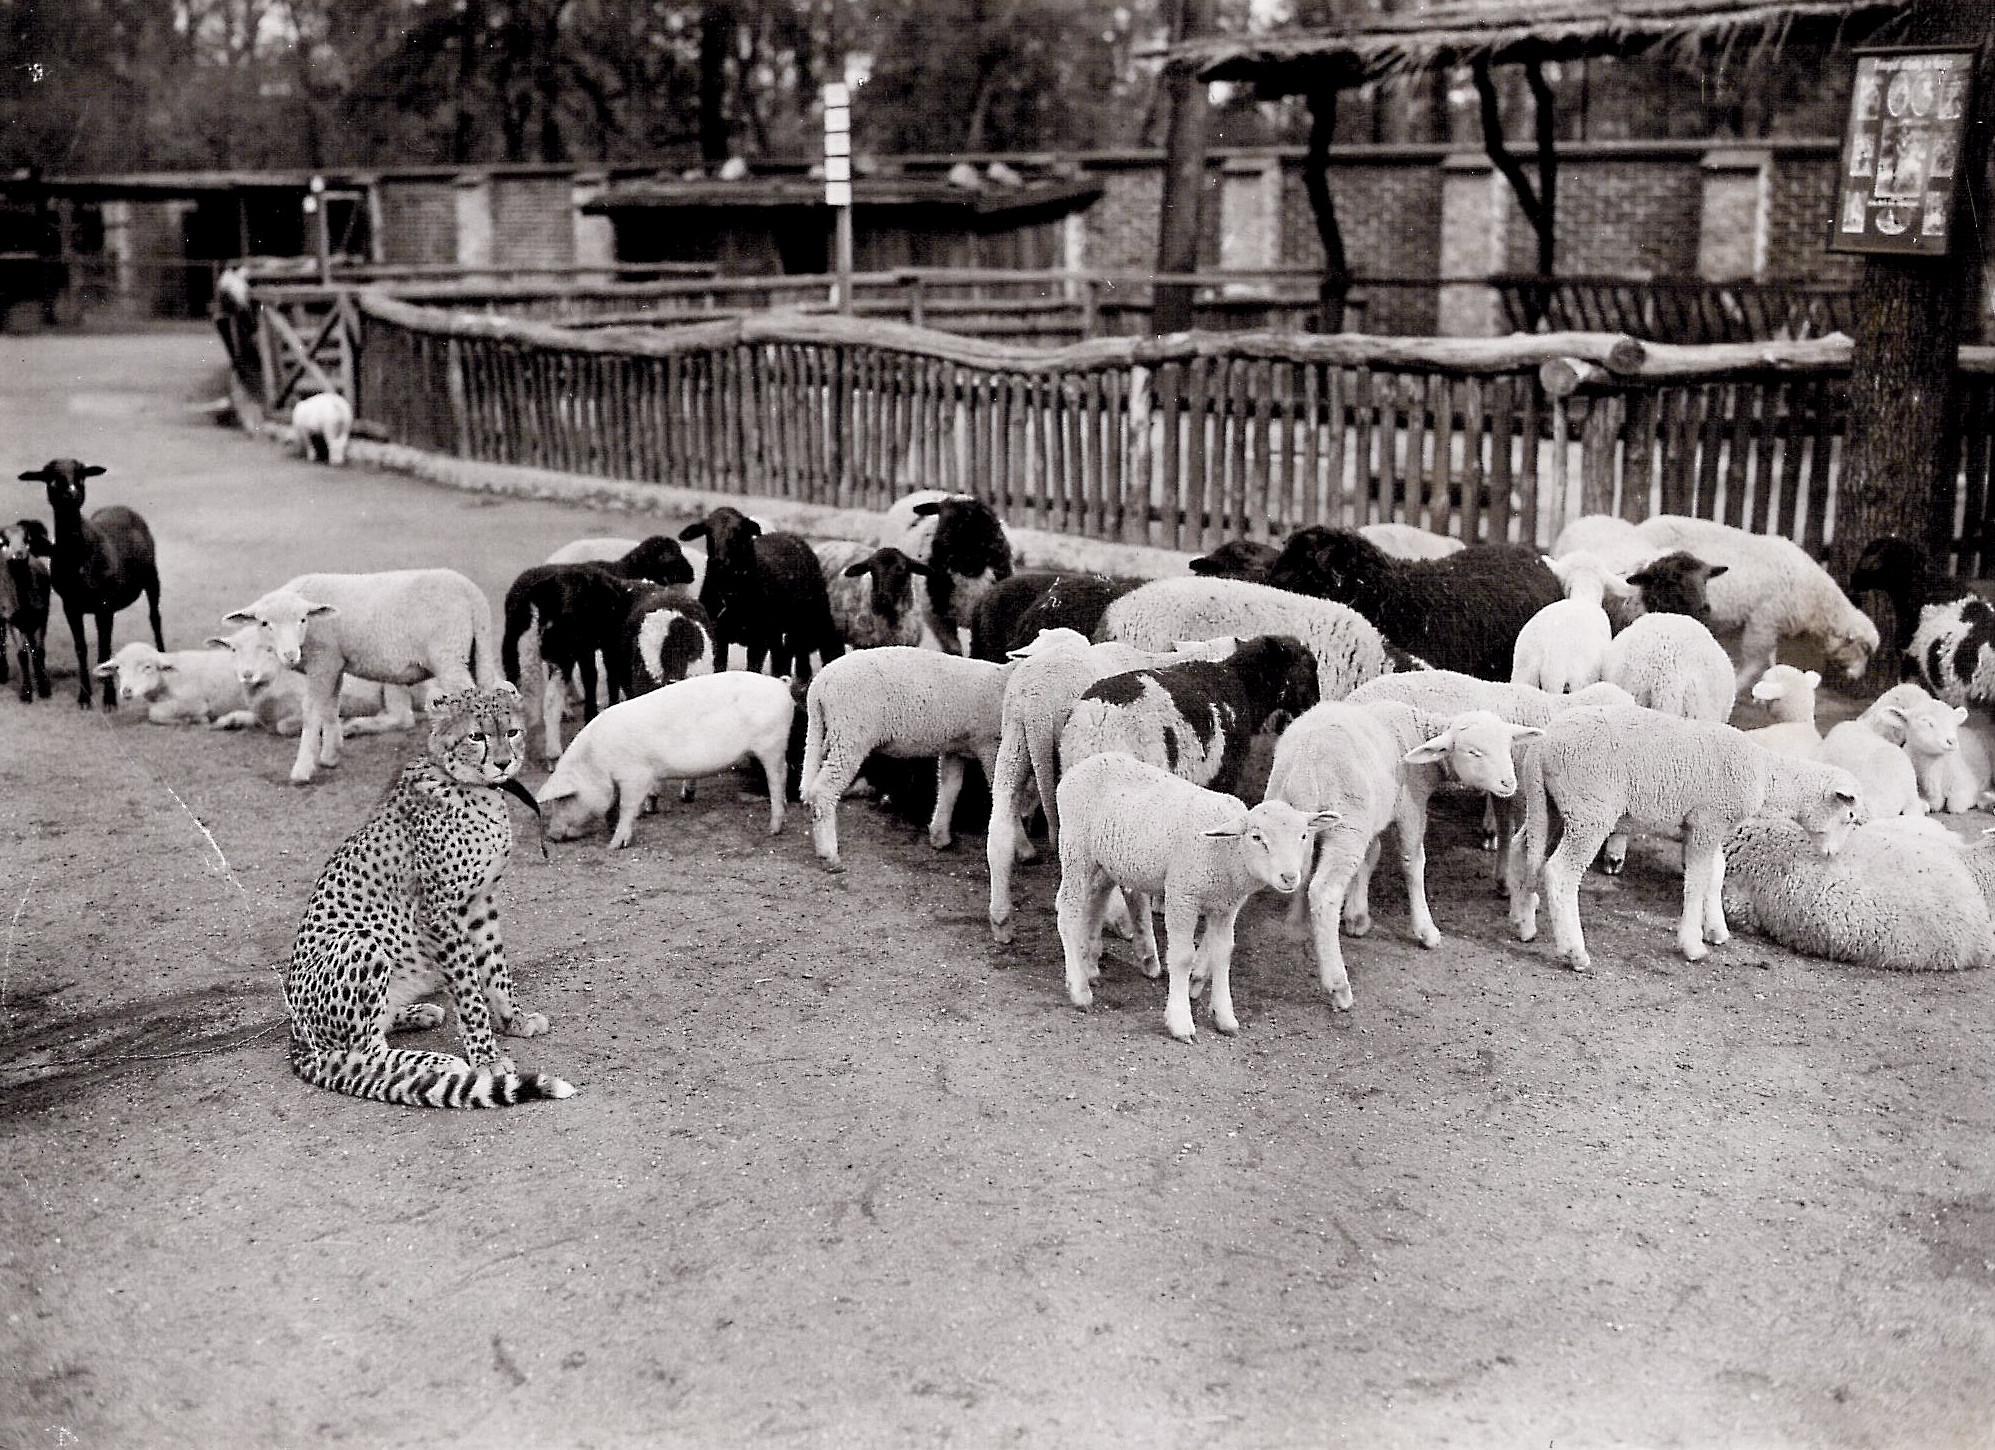 A cheetah cub sits in front of a group of young domestic pigs and sheep in a fenced-in enclosure.